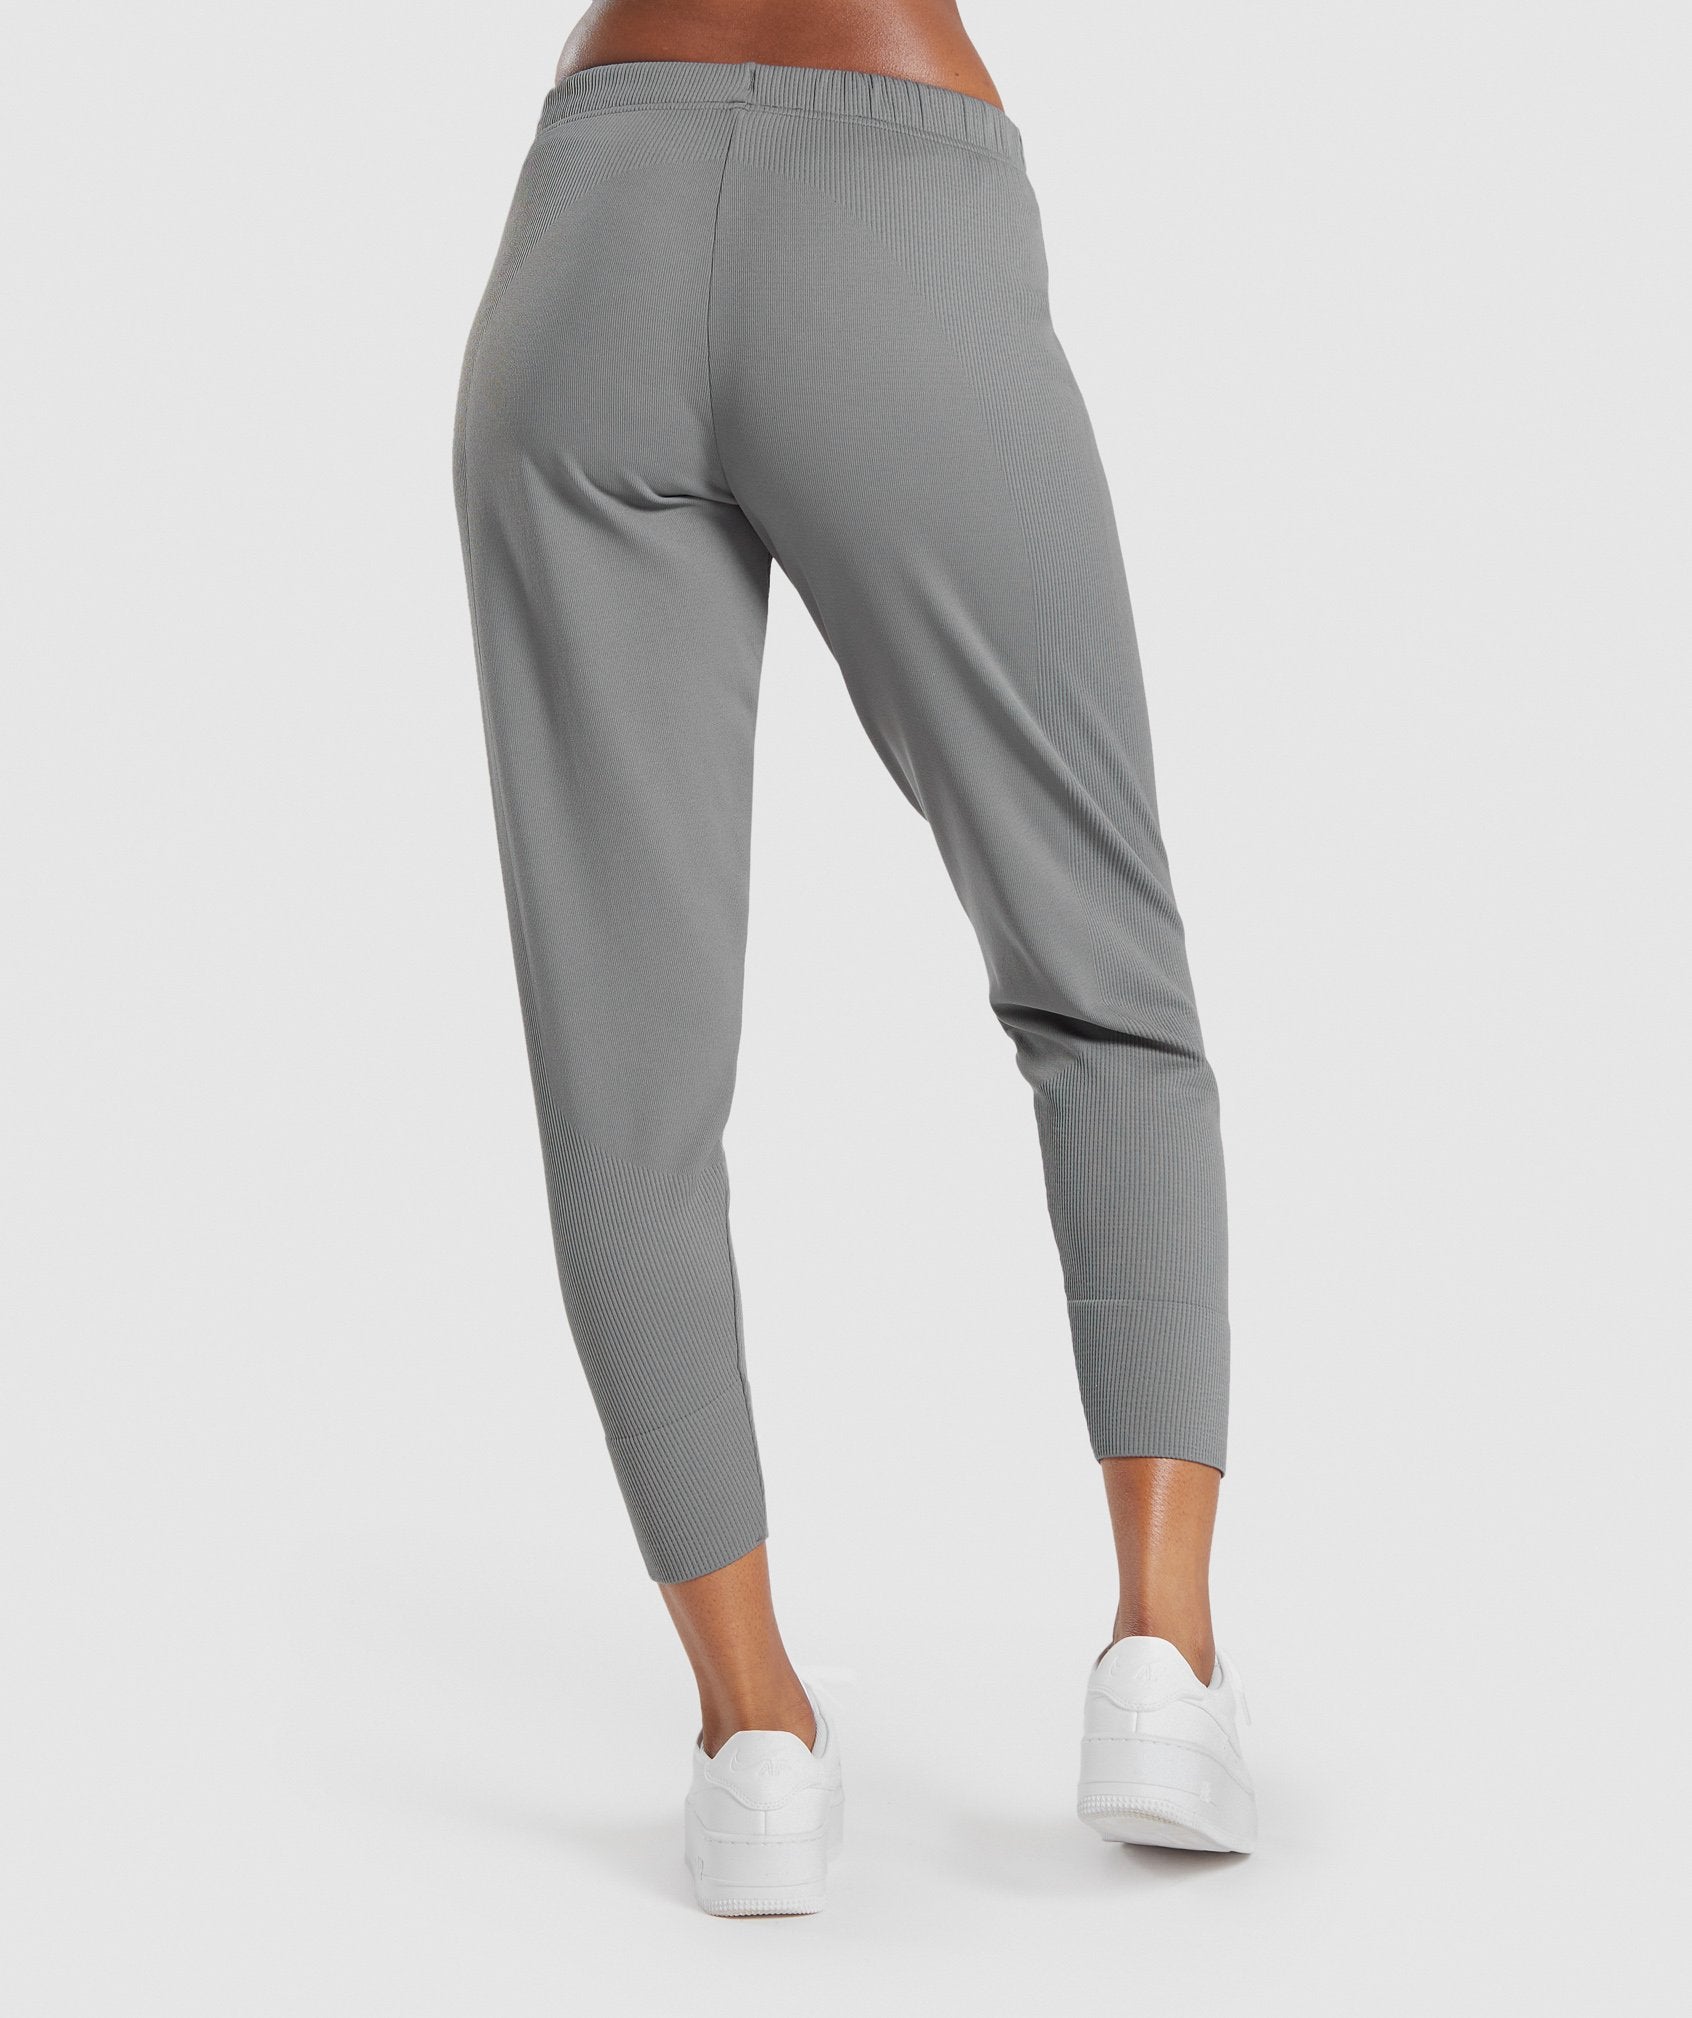 Pause Joggers in Charcoal - view 2